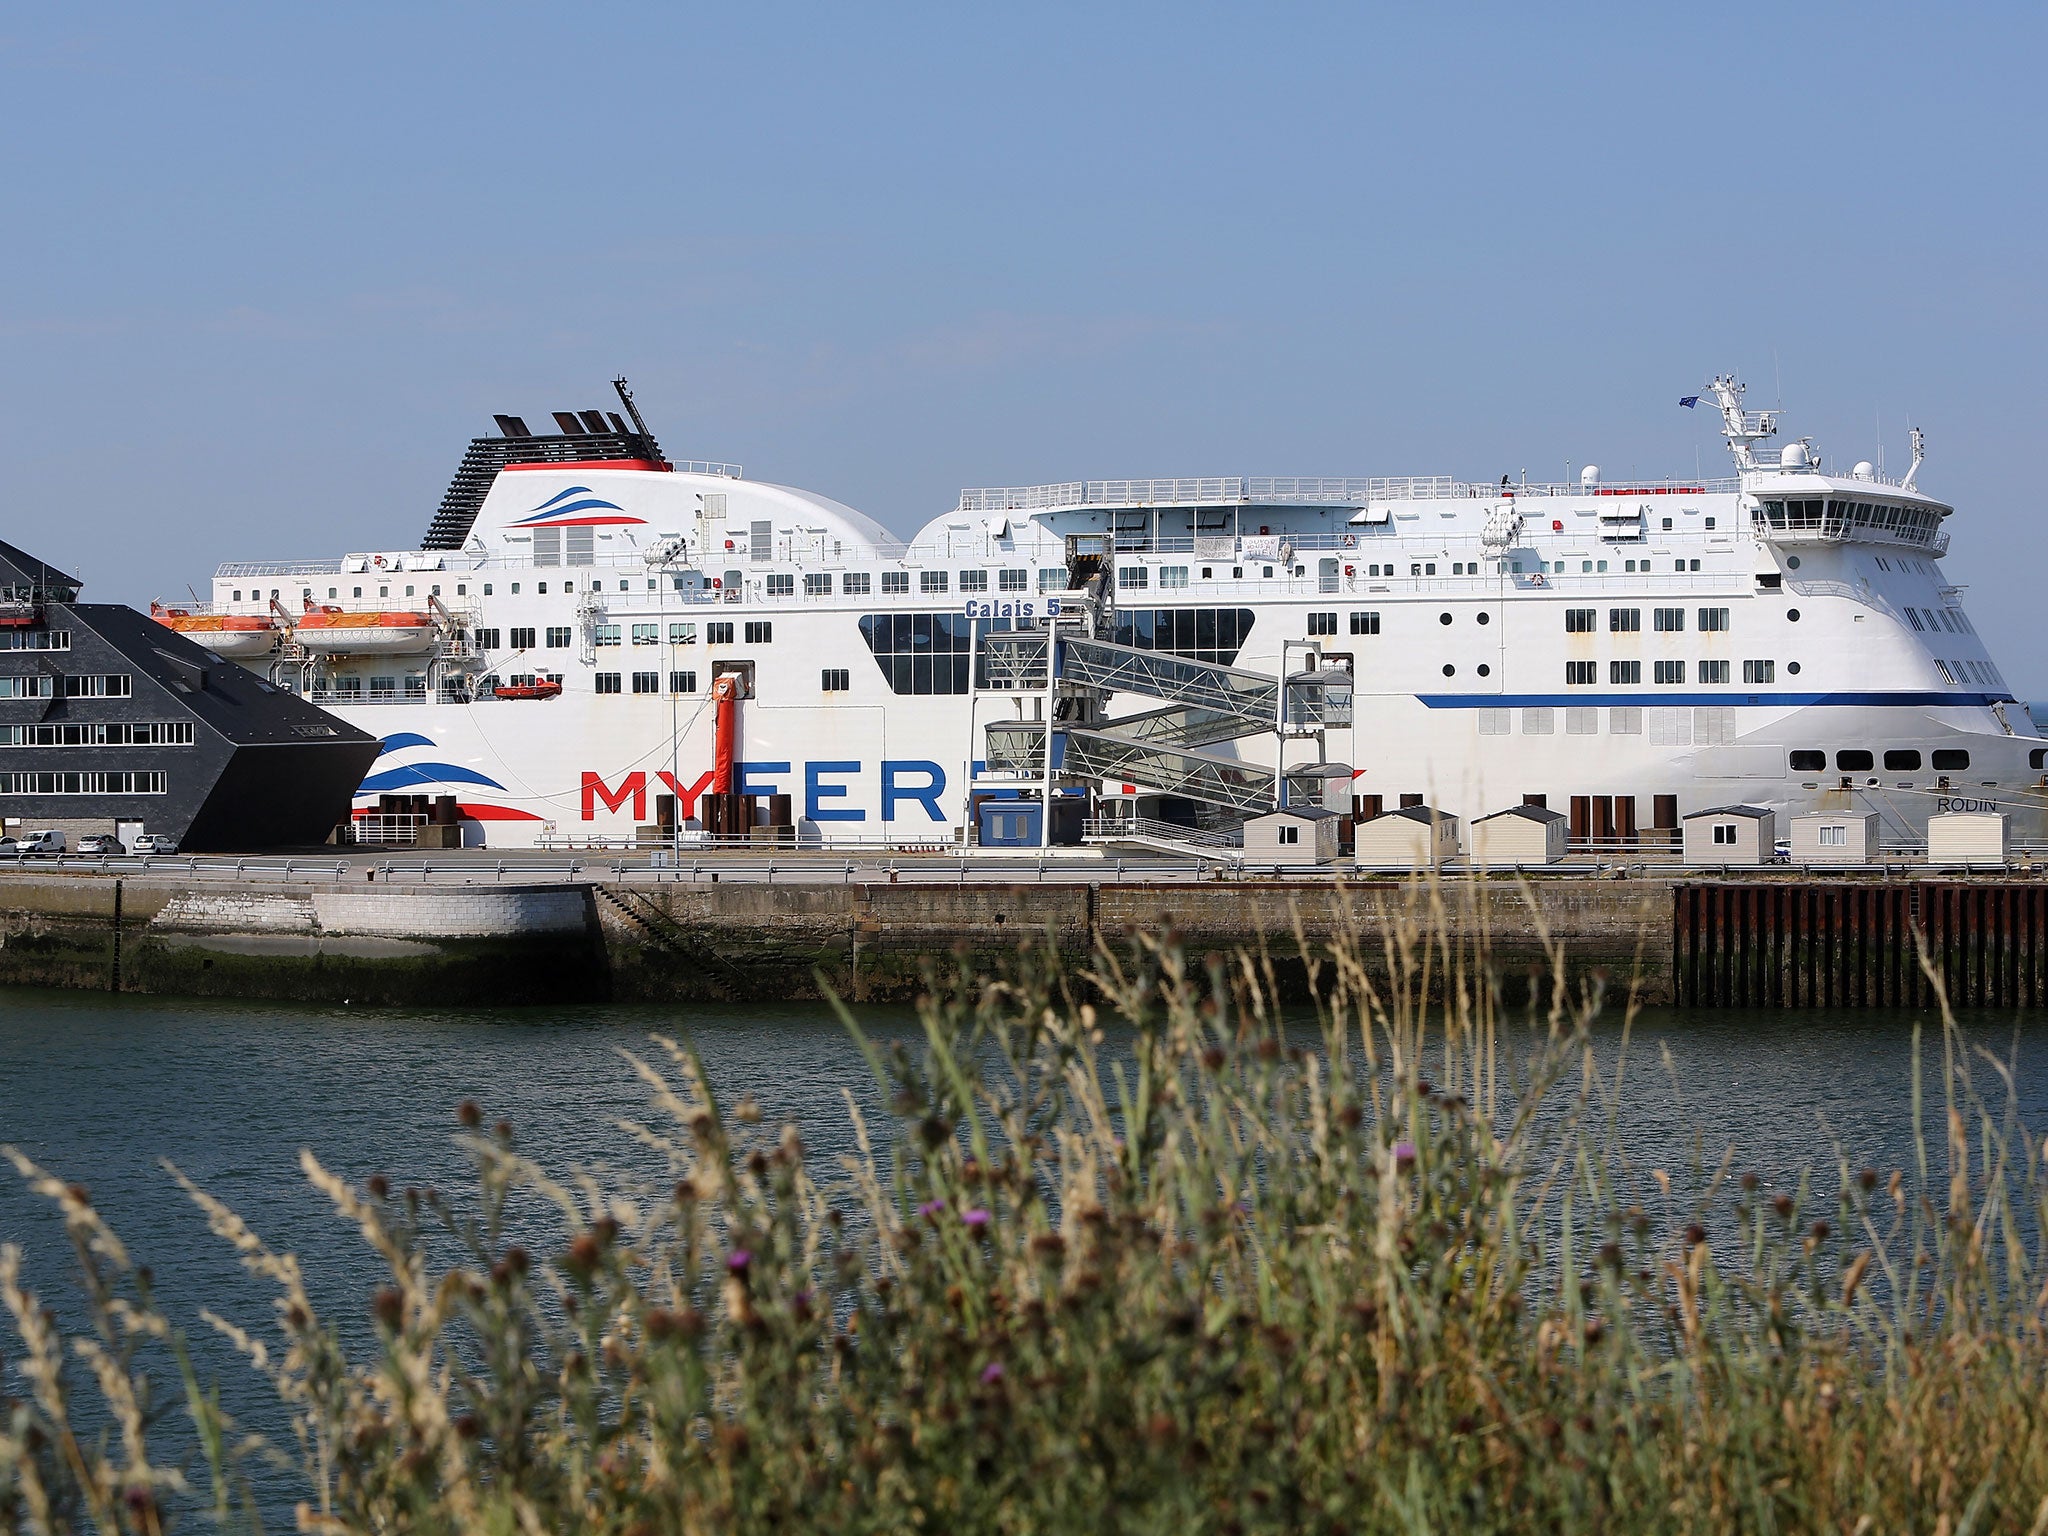 Ferry services at Calais have resumed following fresh protests by former workers of MyFeryLink. Pictured is a MyFerryLink boat as it docks in Calais in July